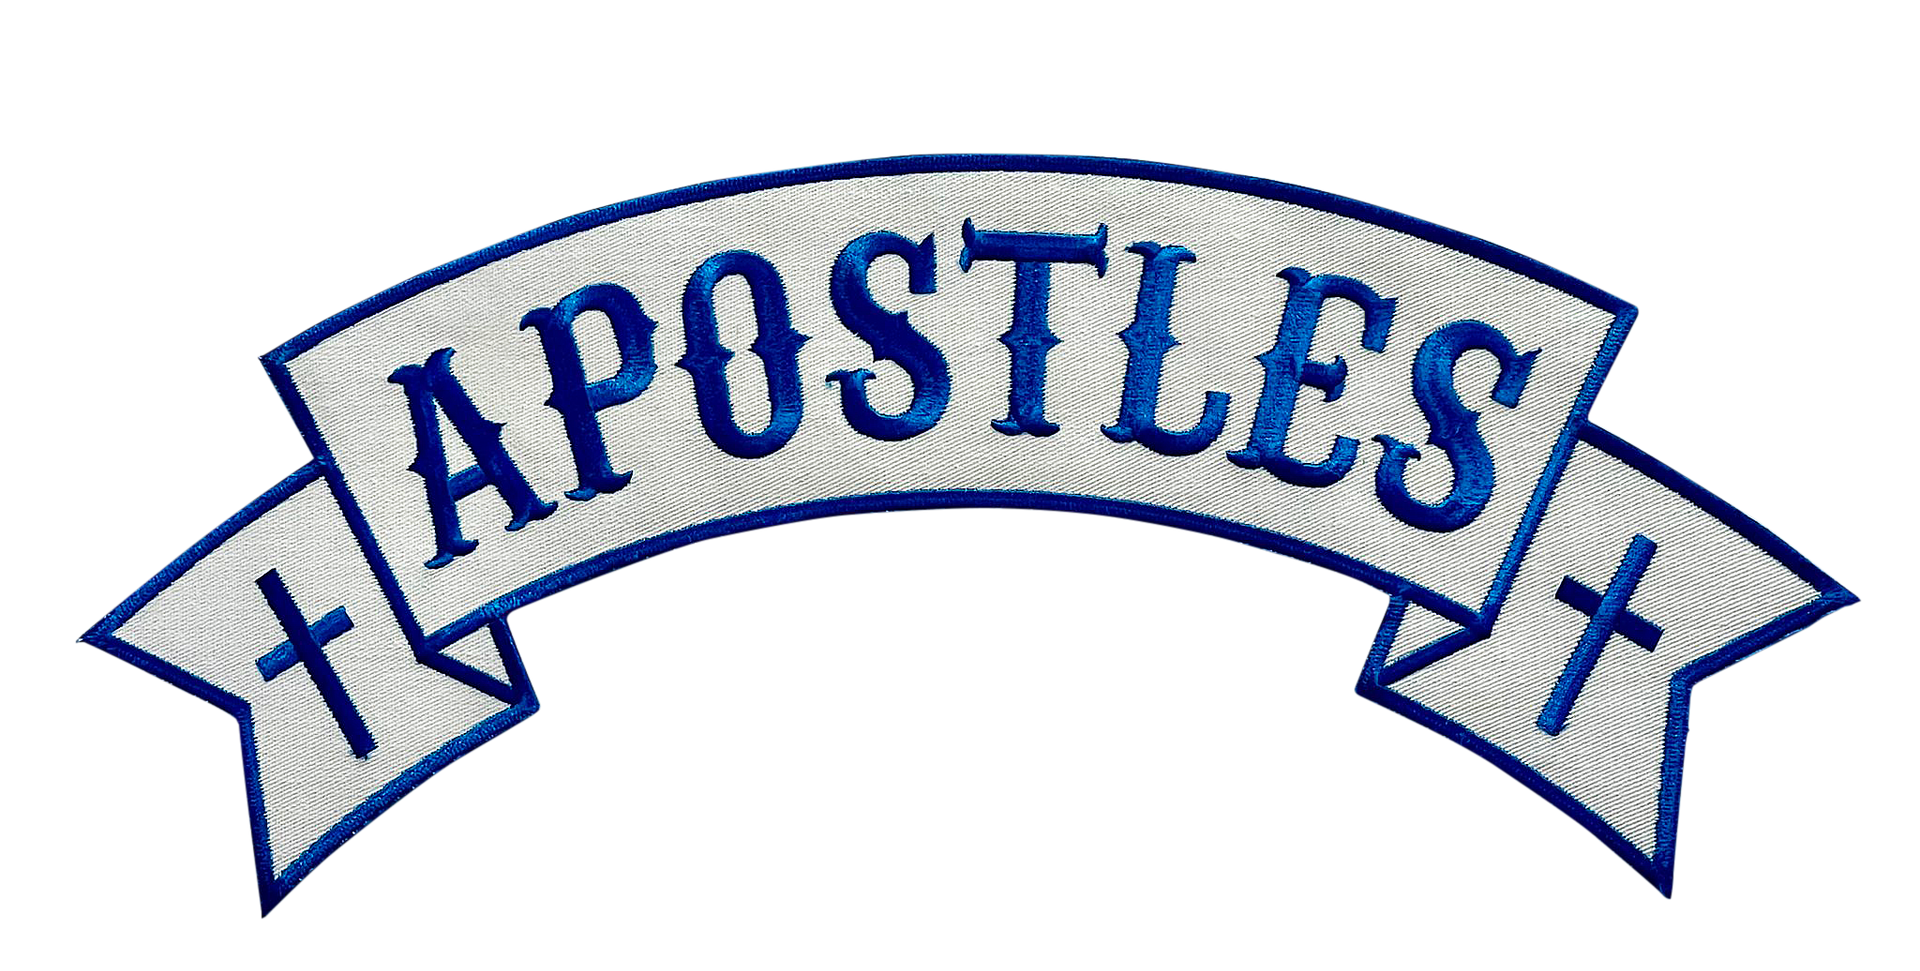 The word apostles is embroidered on a white ribbon with a cross.